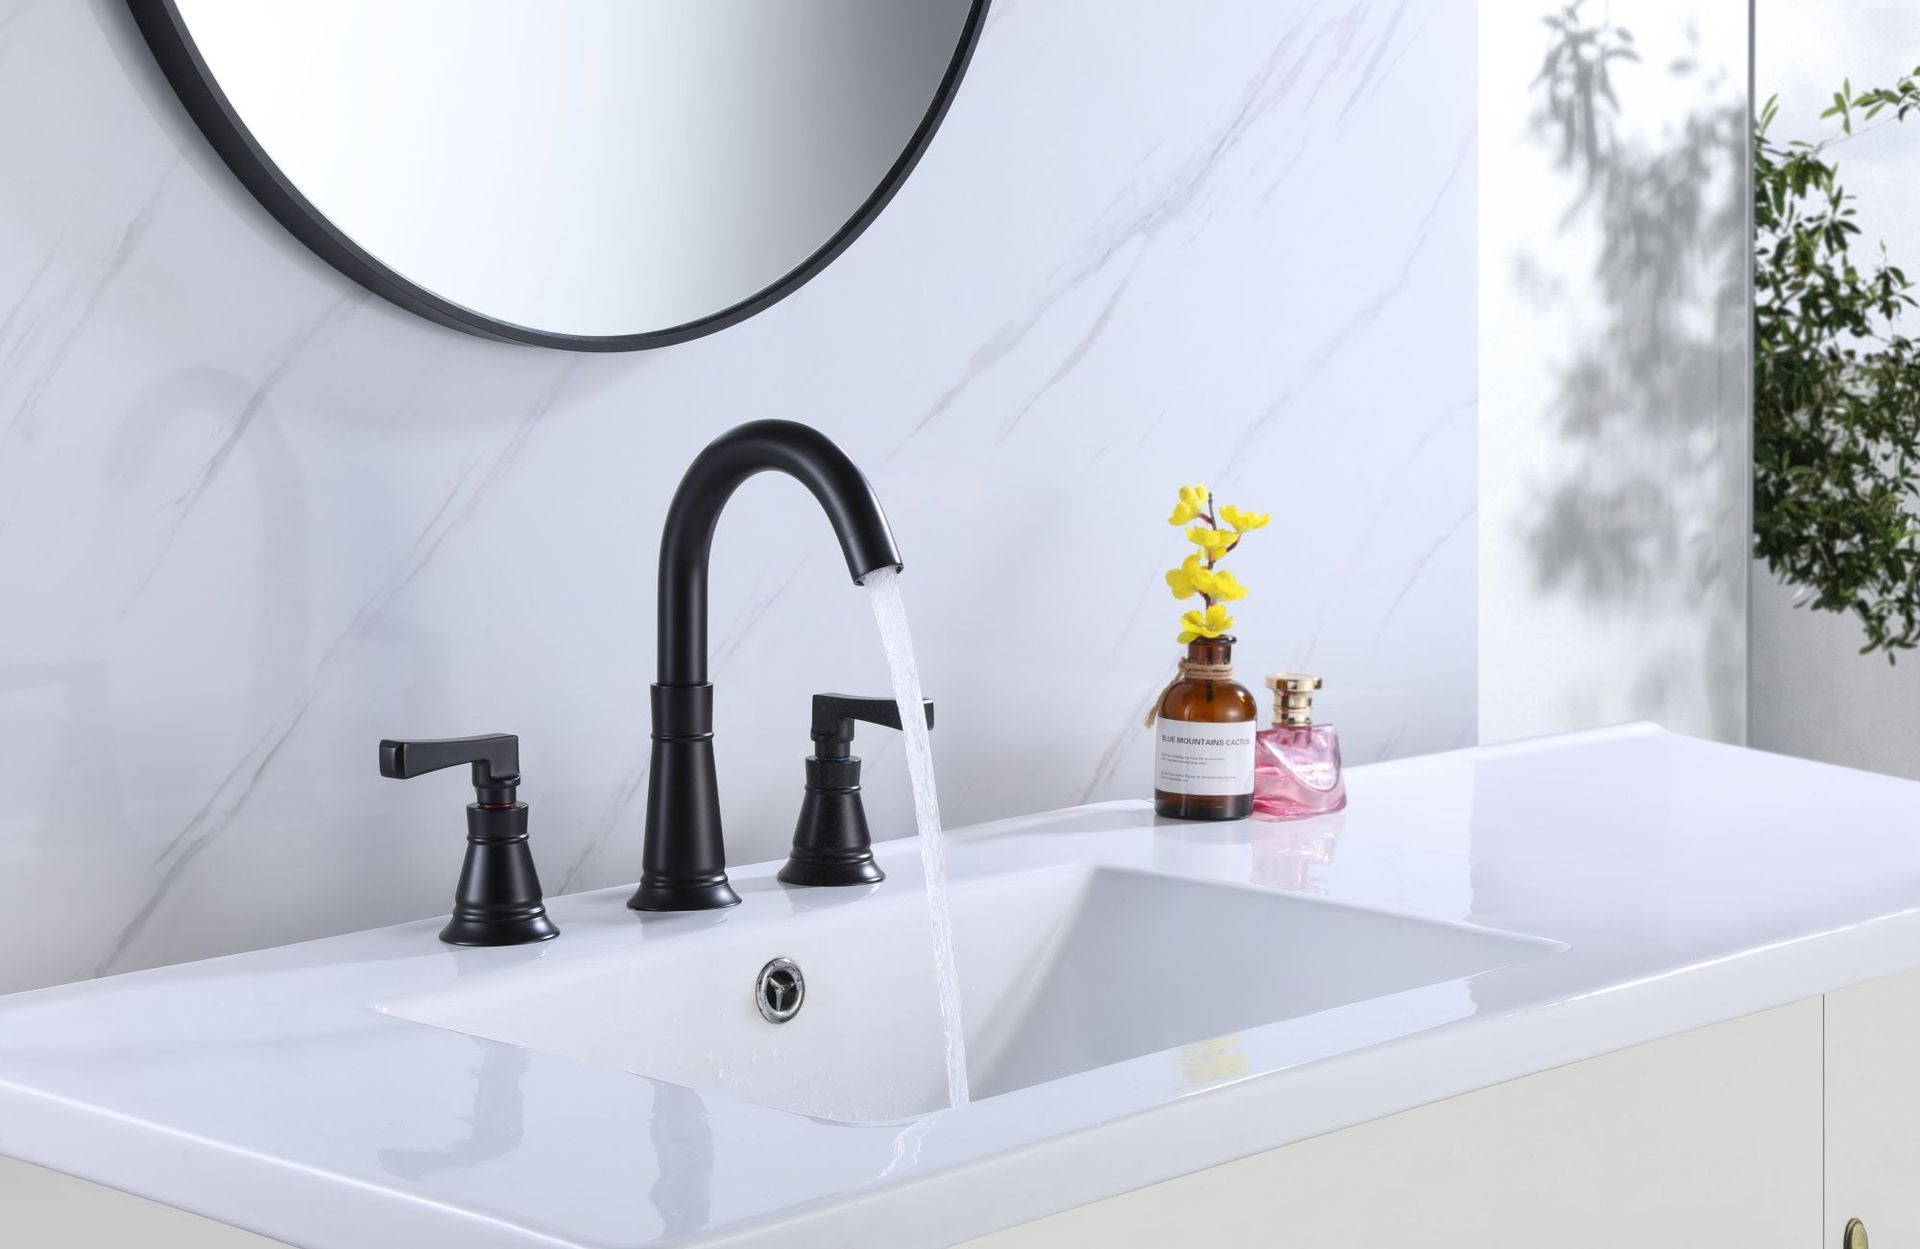 Full Brass Three Hole Faucet, Cold and Hot European Split Bathroom Faucet - Matte Black